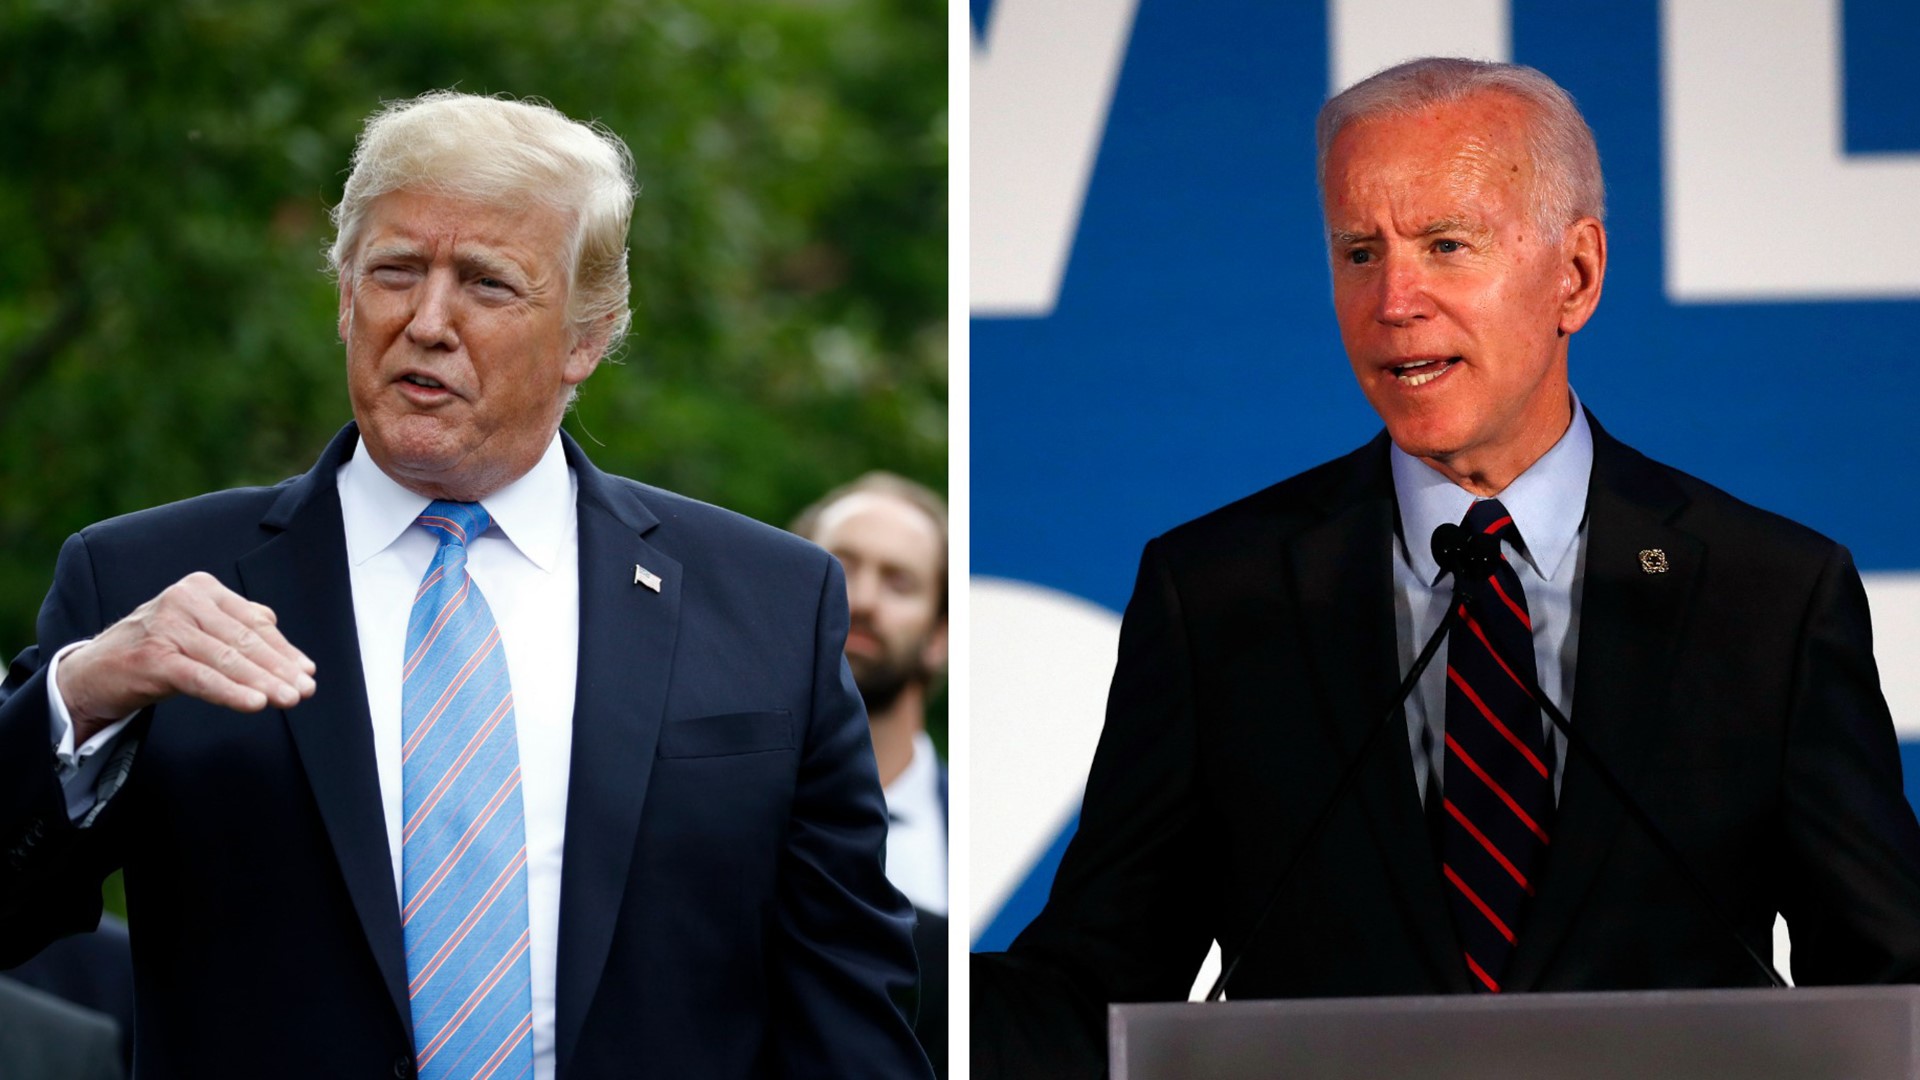 Biden is one of two dozen Democratic candidates, but leads most polls among the Democrats and in a head-to-head match up has a 52%-41% edge over Trump, who won Michigan by less than 1 percentage point in 2016.